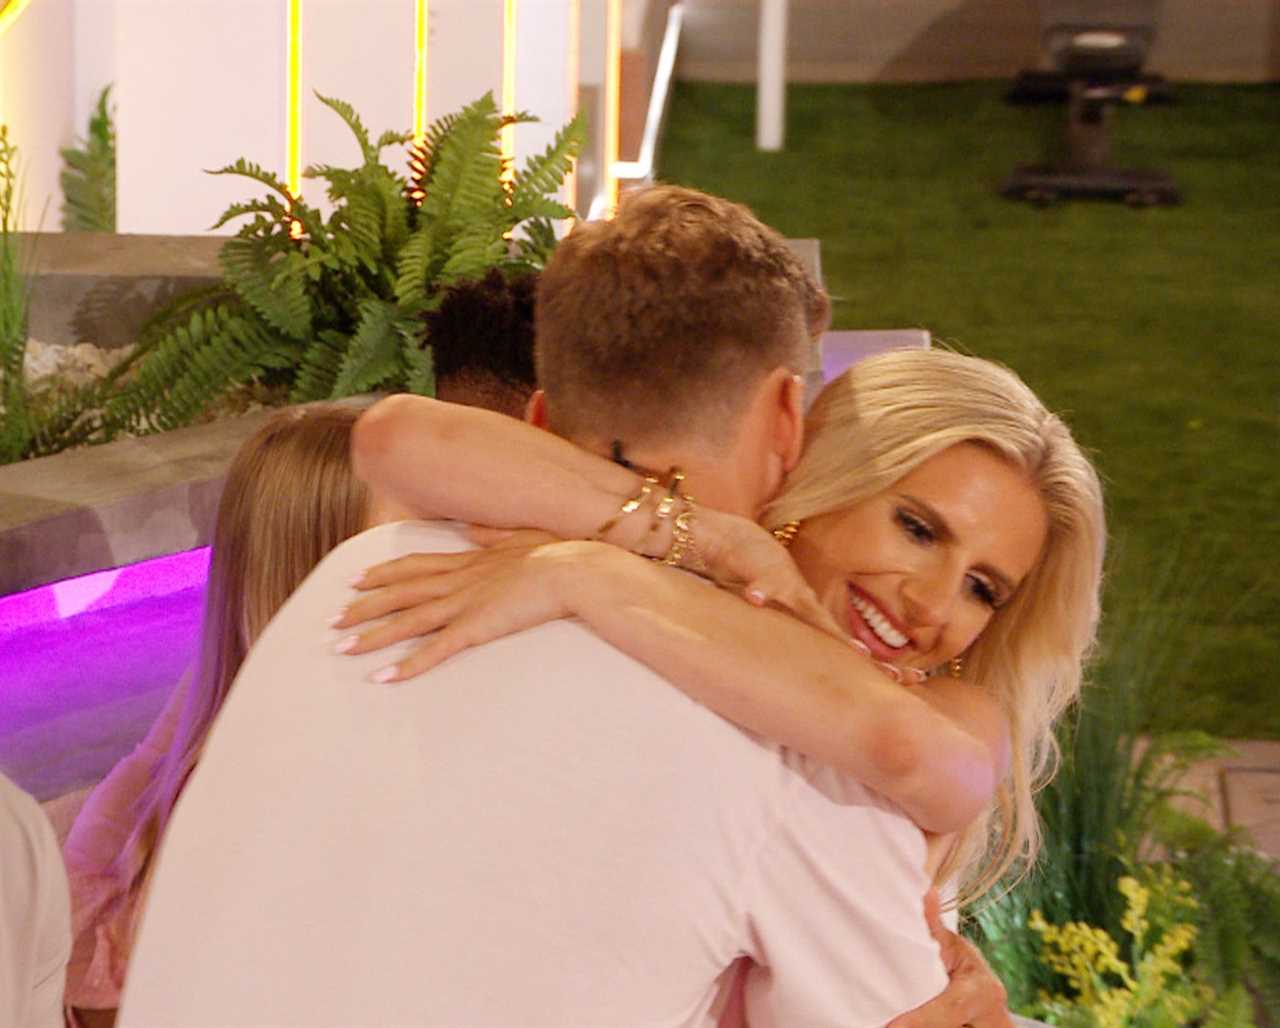 Hugo came to Chloe's rescue on Love Island after Toby pied her in a shock recoupling